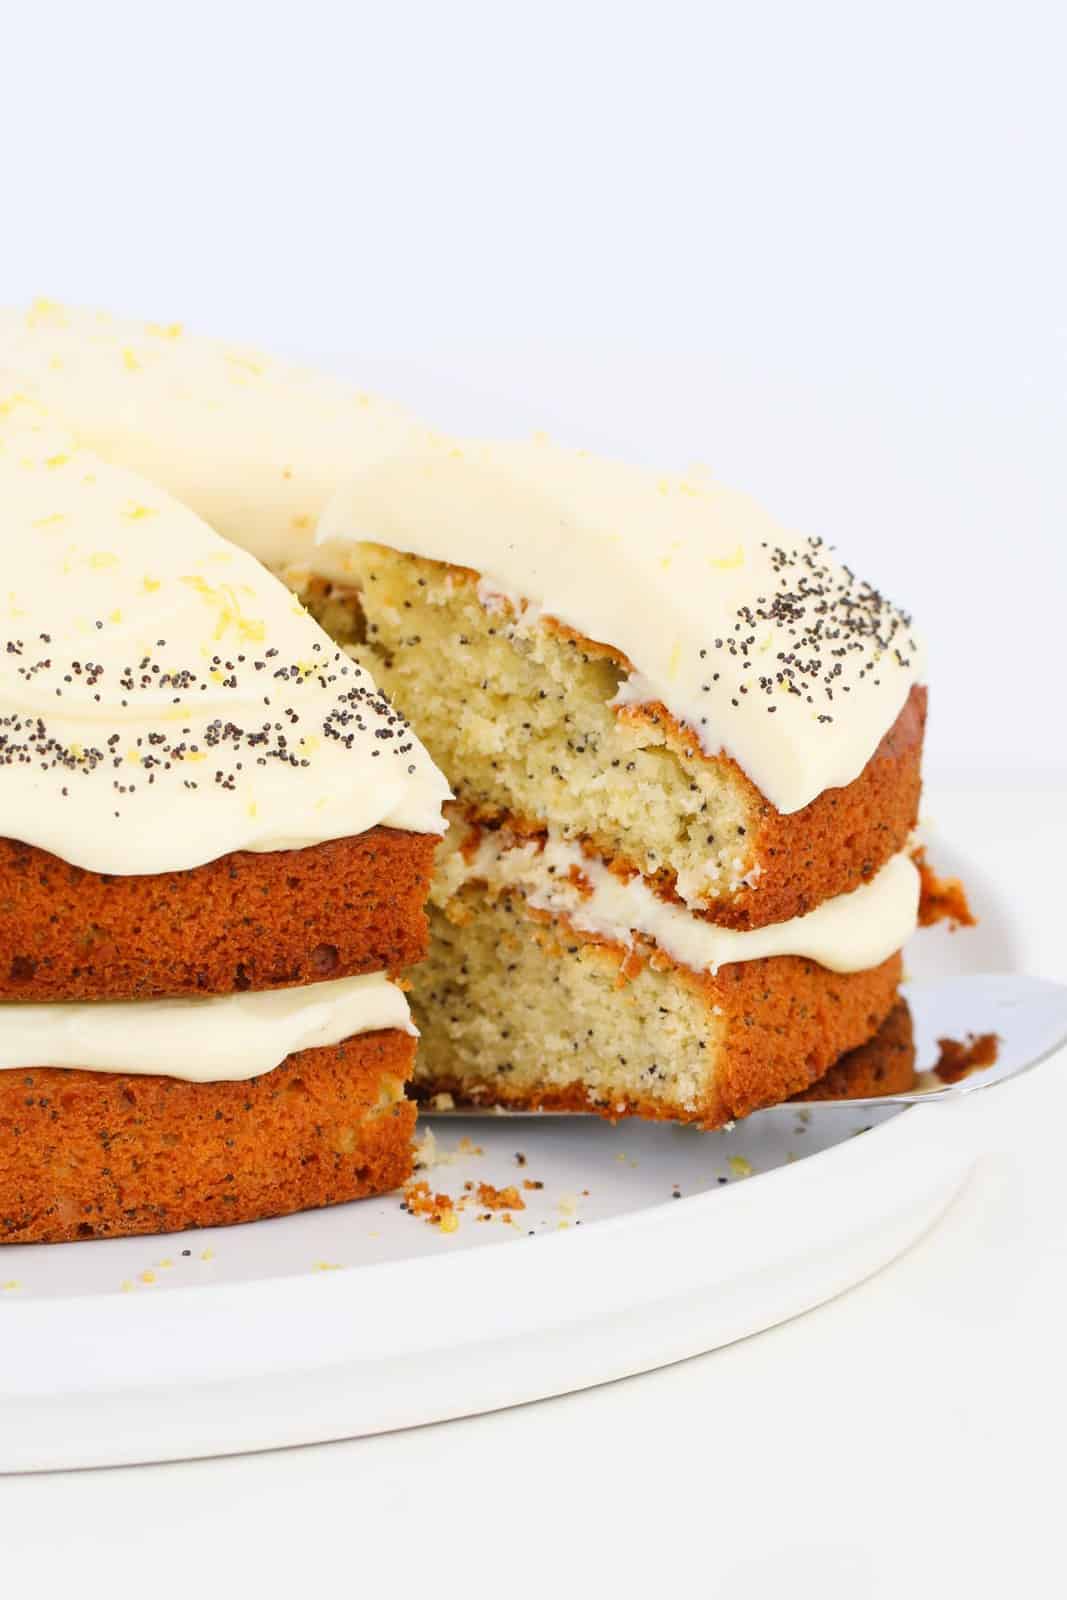 A slice of poppy seed cake with cream cheese frosting being removed from the rest of the cake.